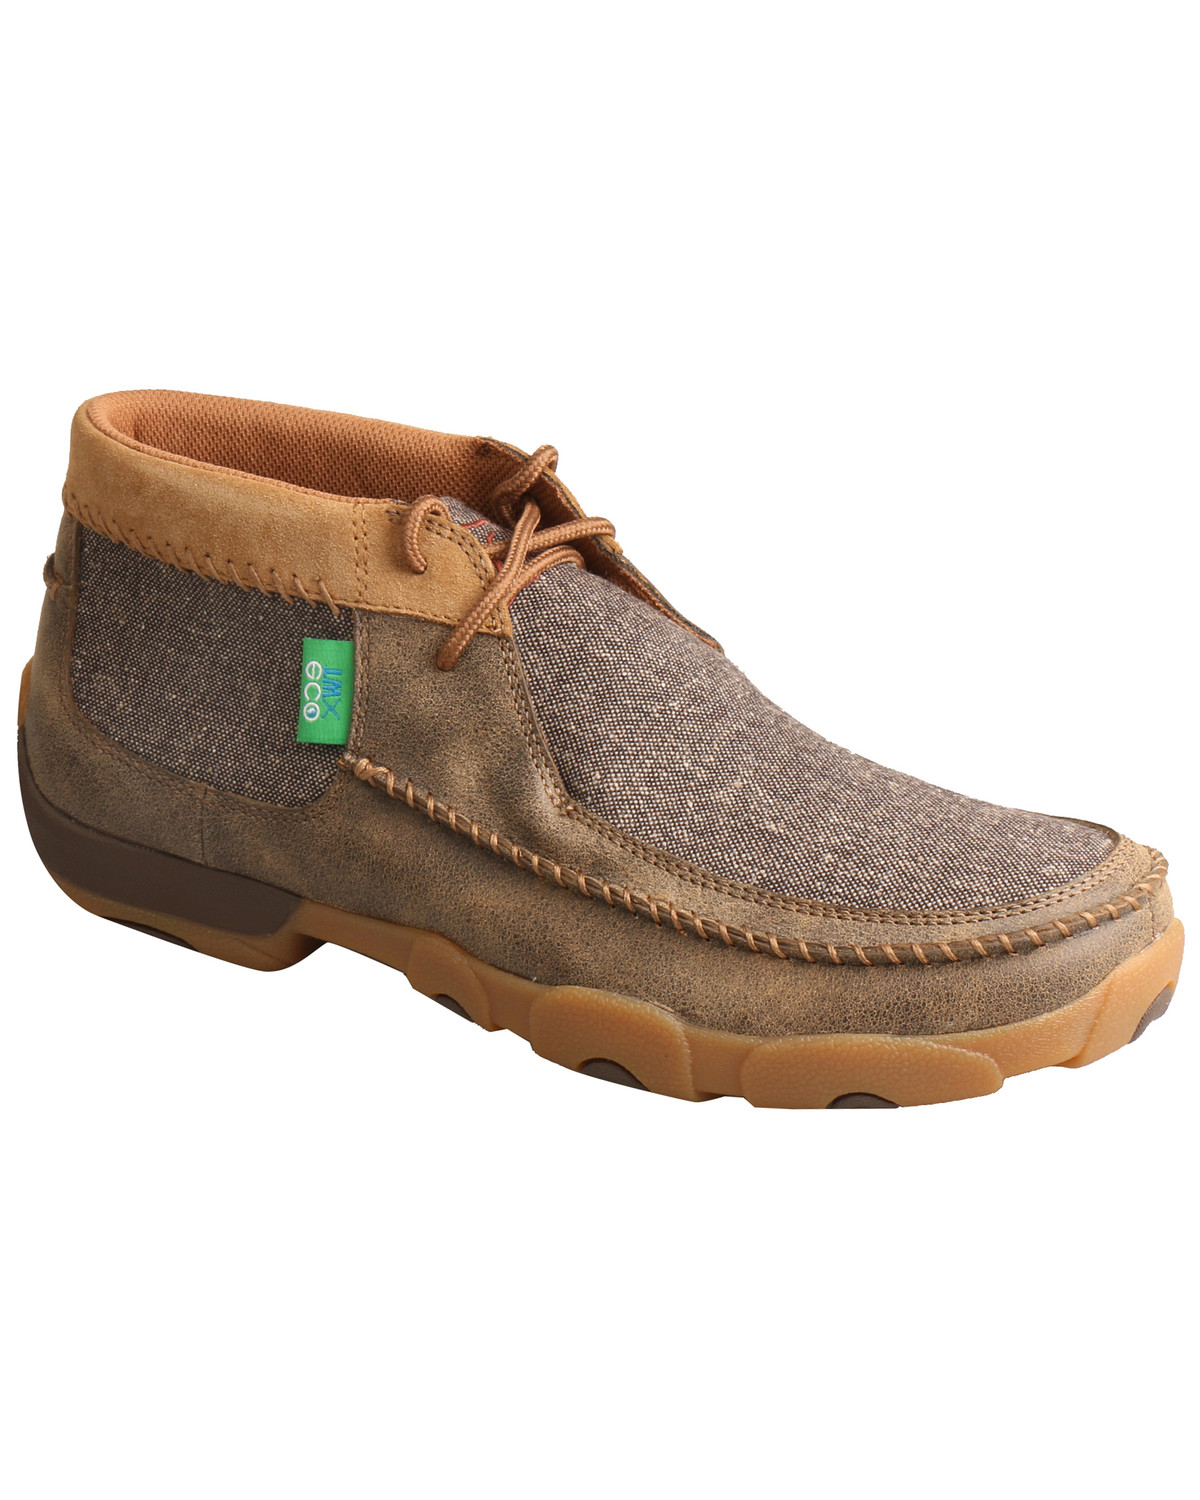 Twisted X Men's Driving Moccasin Shoes Moc Toe Sheplers